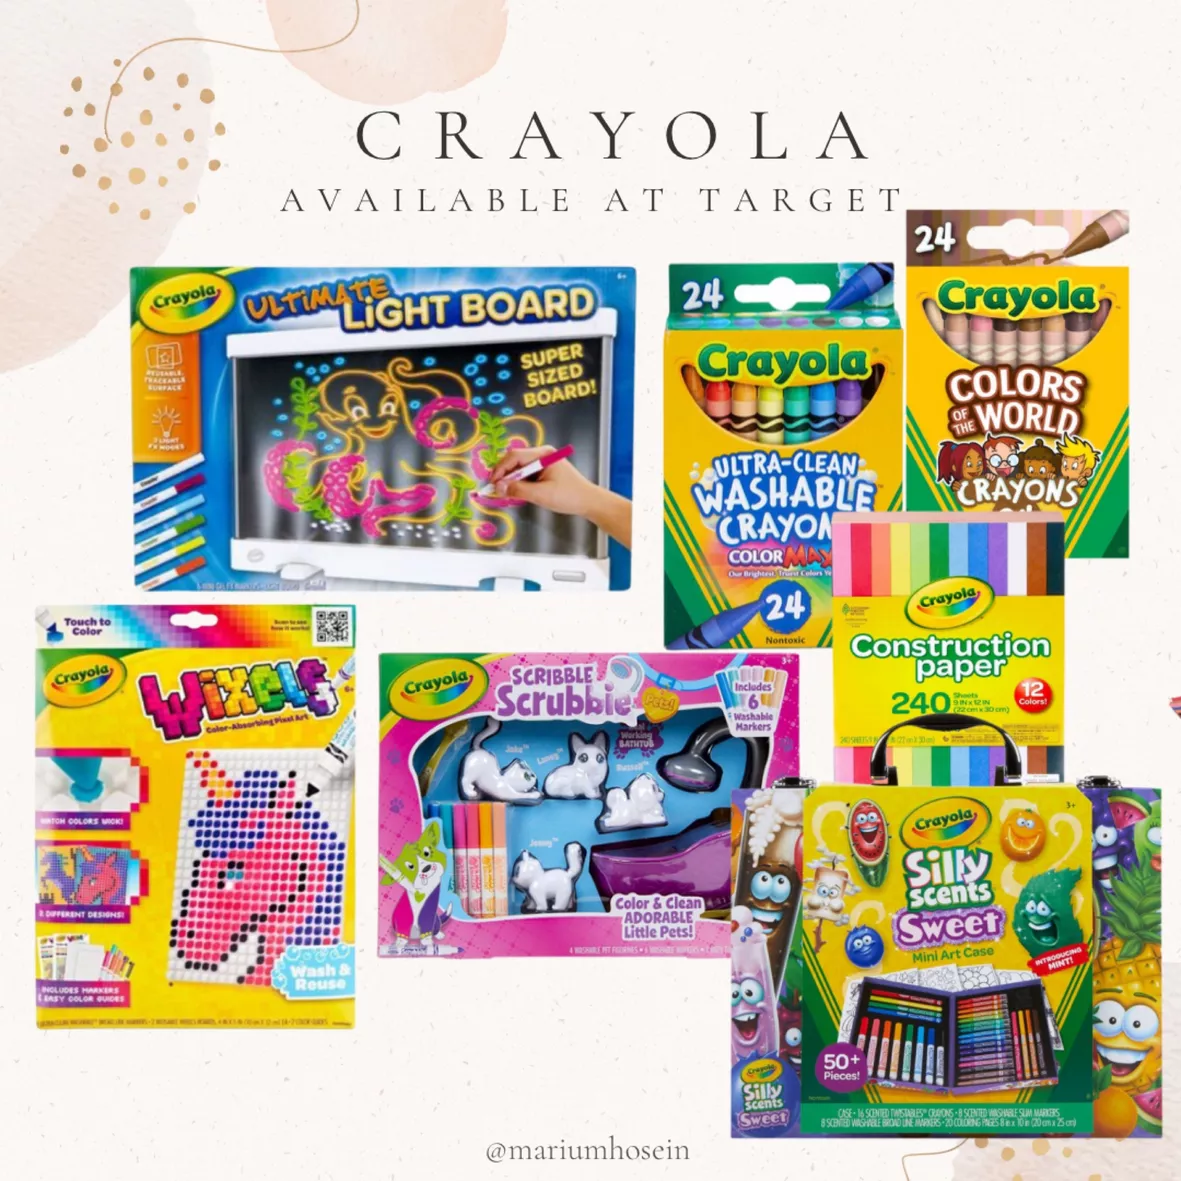 One Crayola art kit is complete and looks new;